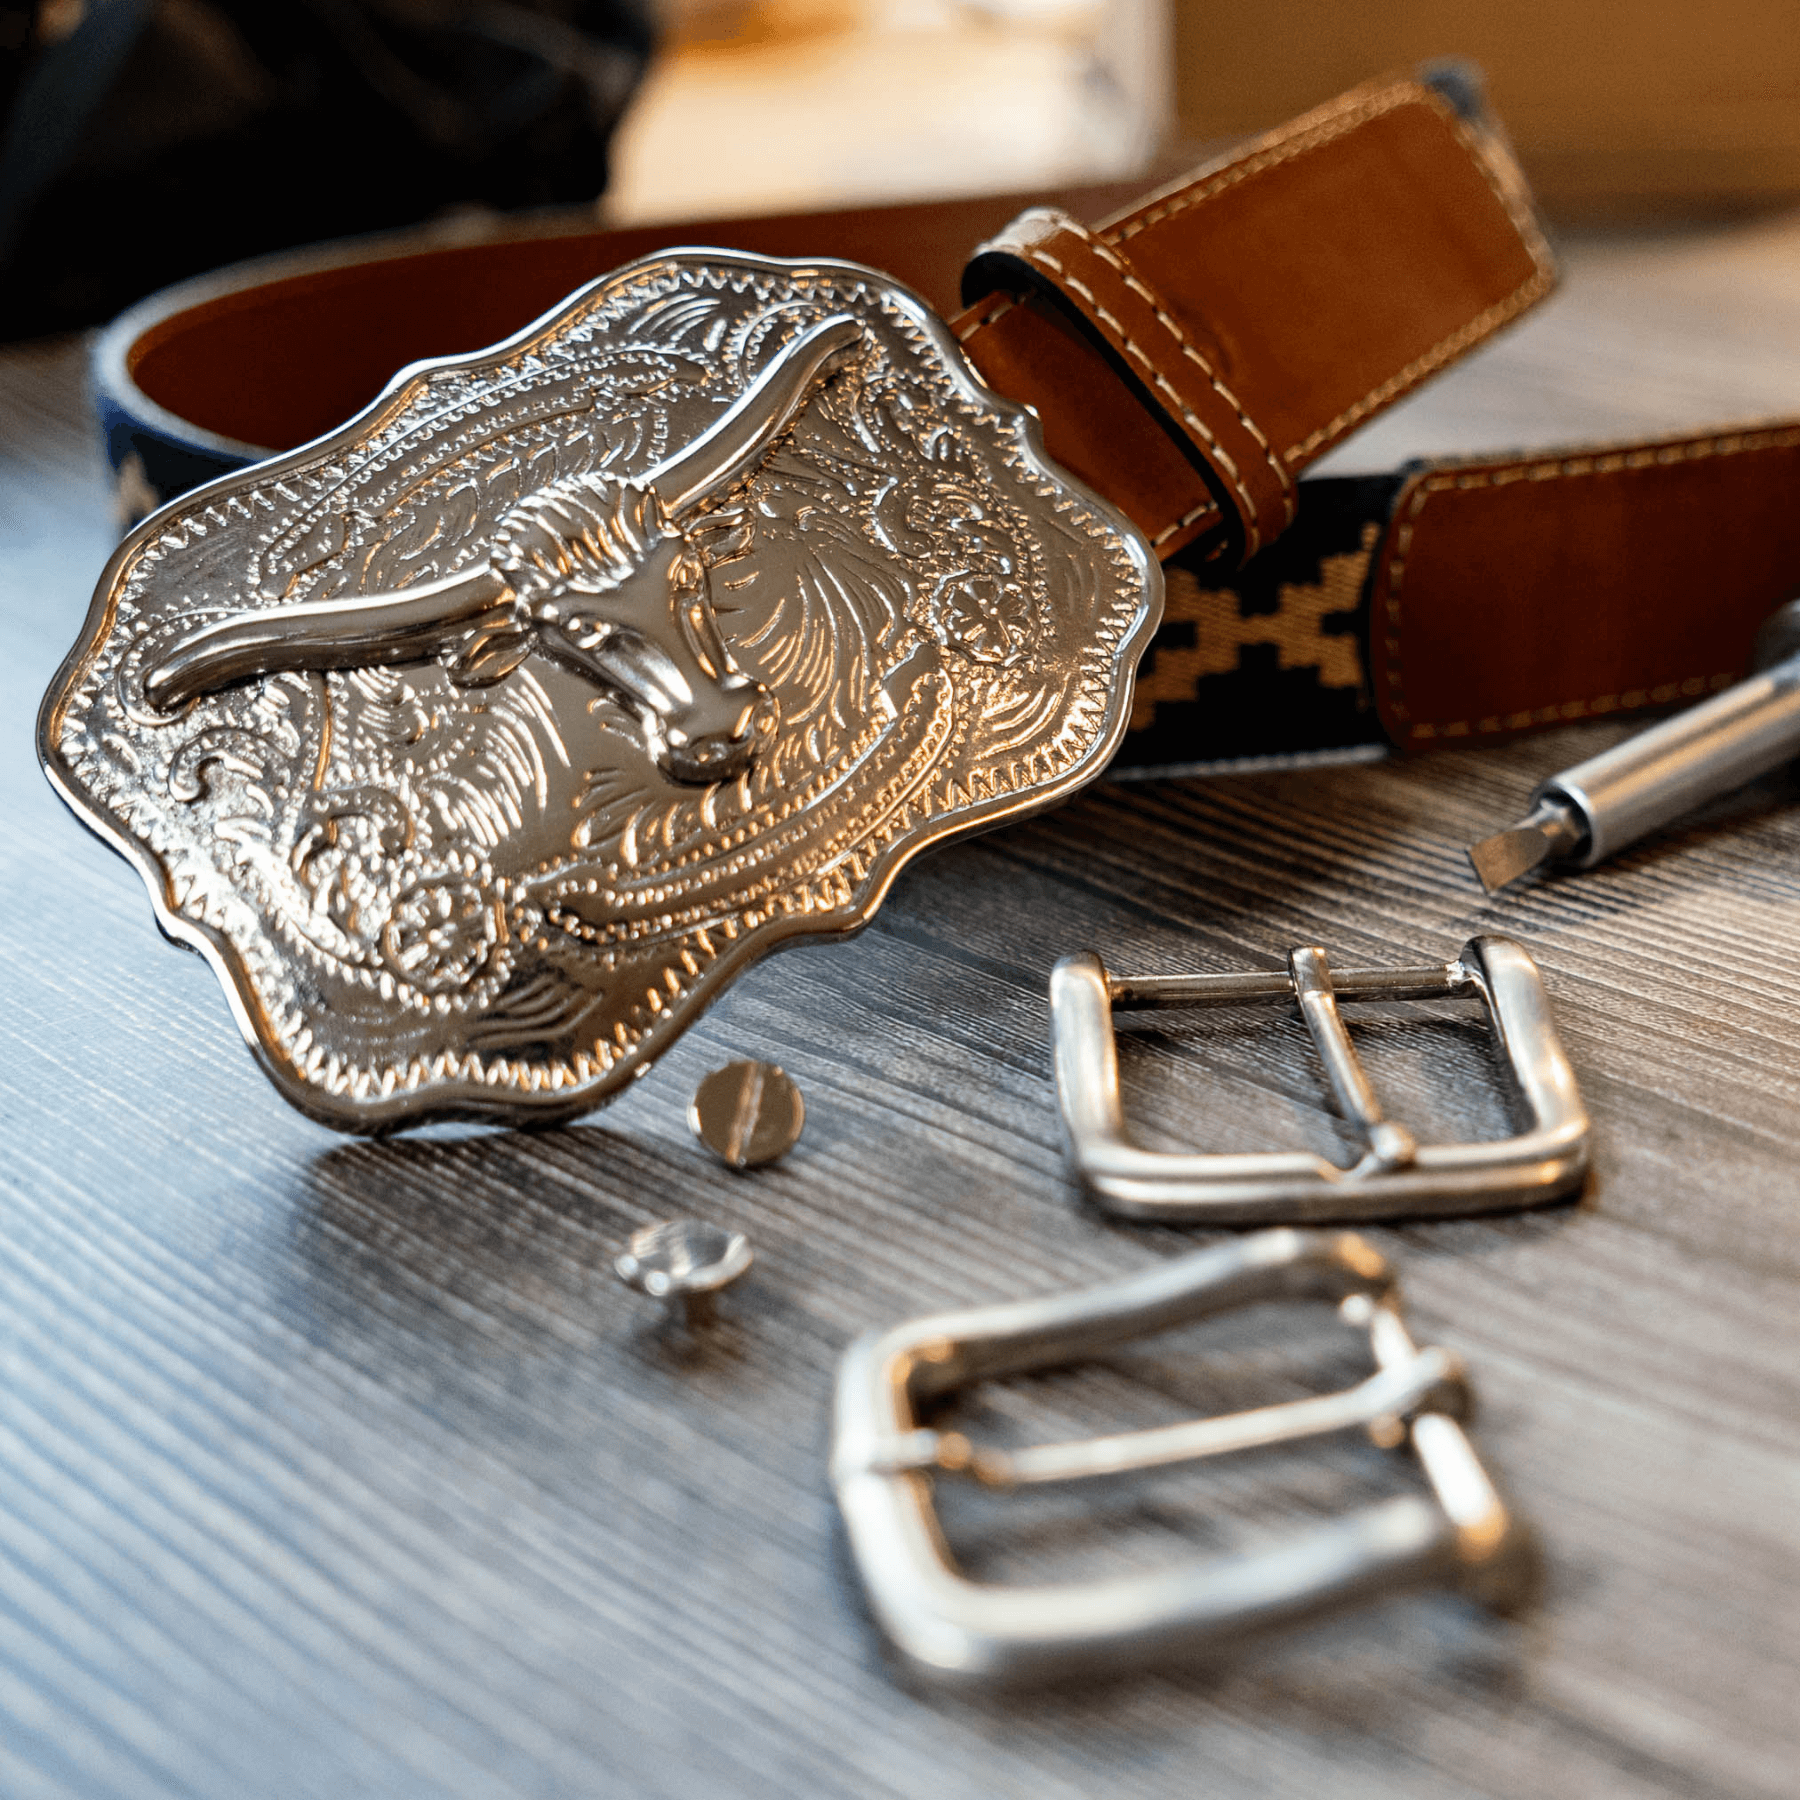 Gaucholife Belts Interchangeable Buckle Leather and Guarda Pampa Belt